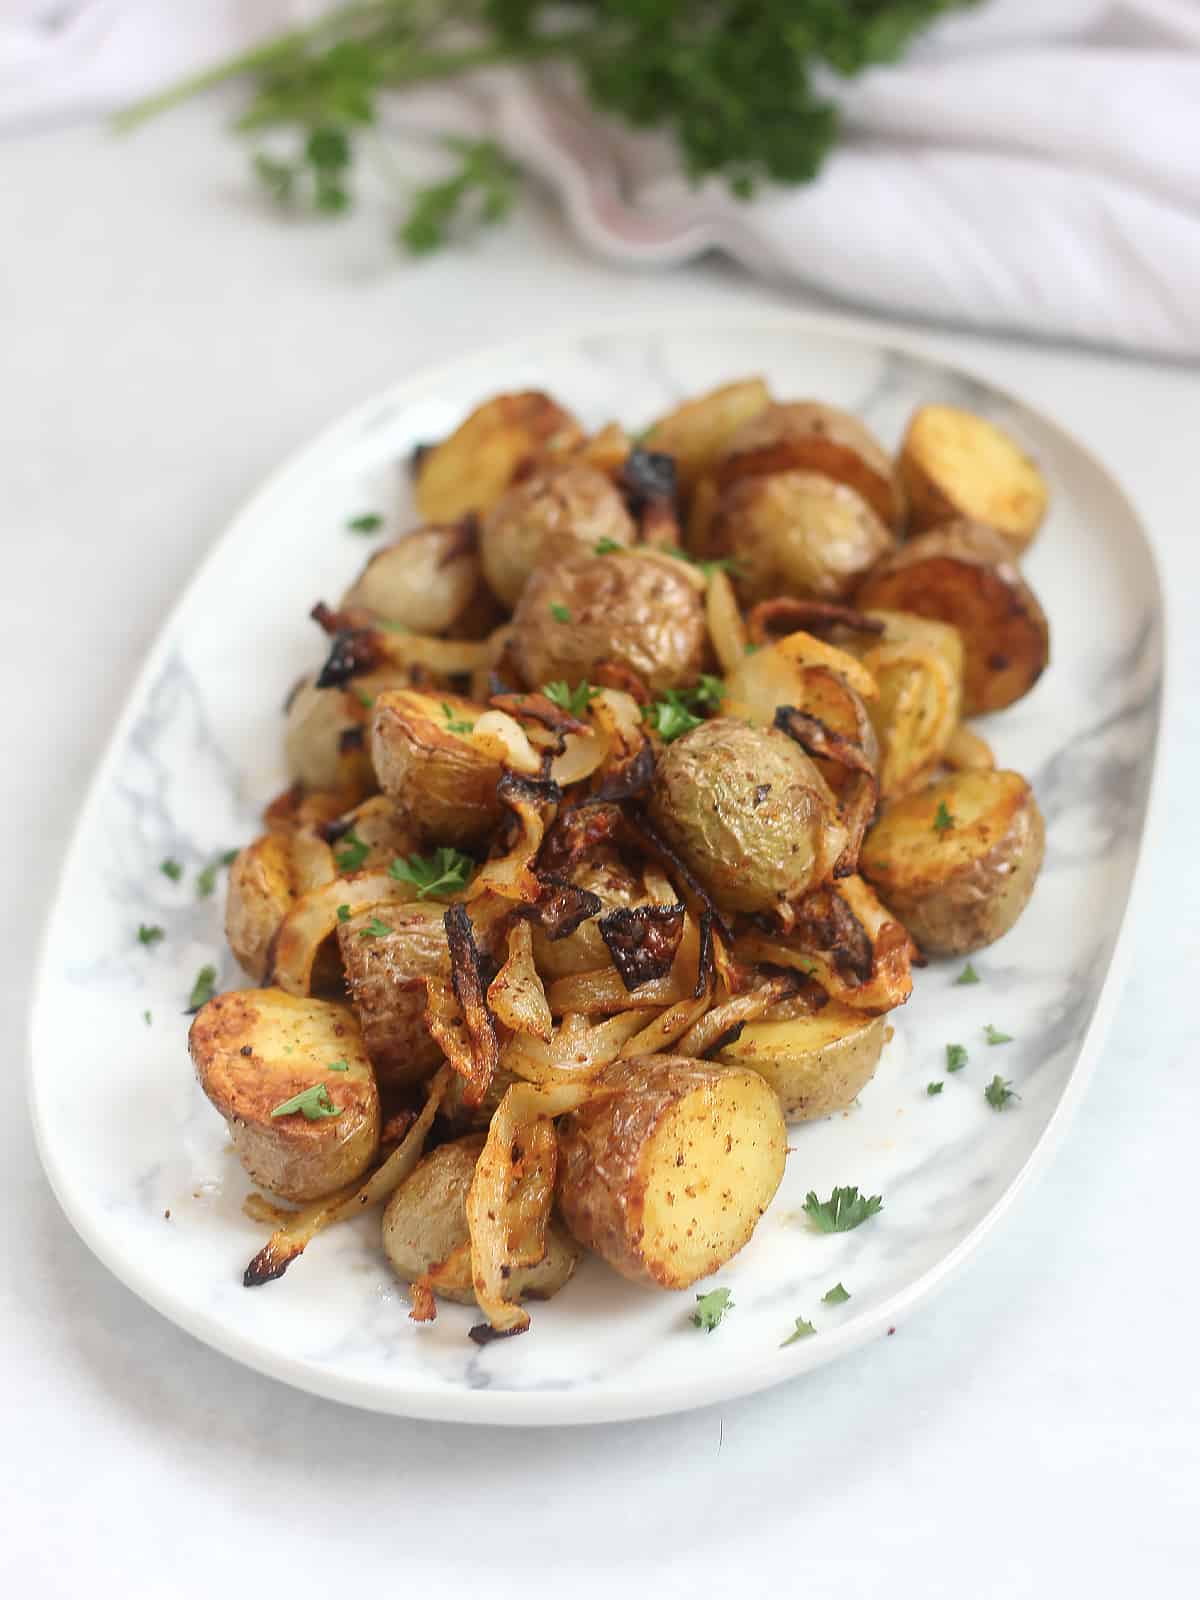 Air fried baby potatoes and onions on a plate garnished with fresh parsley.